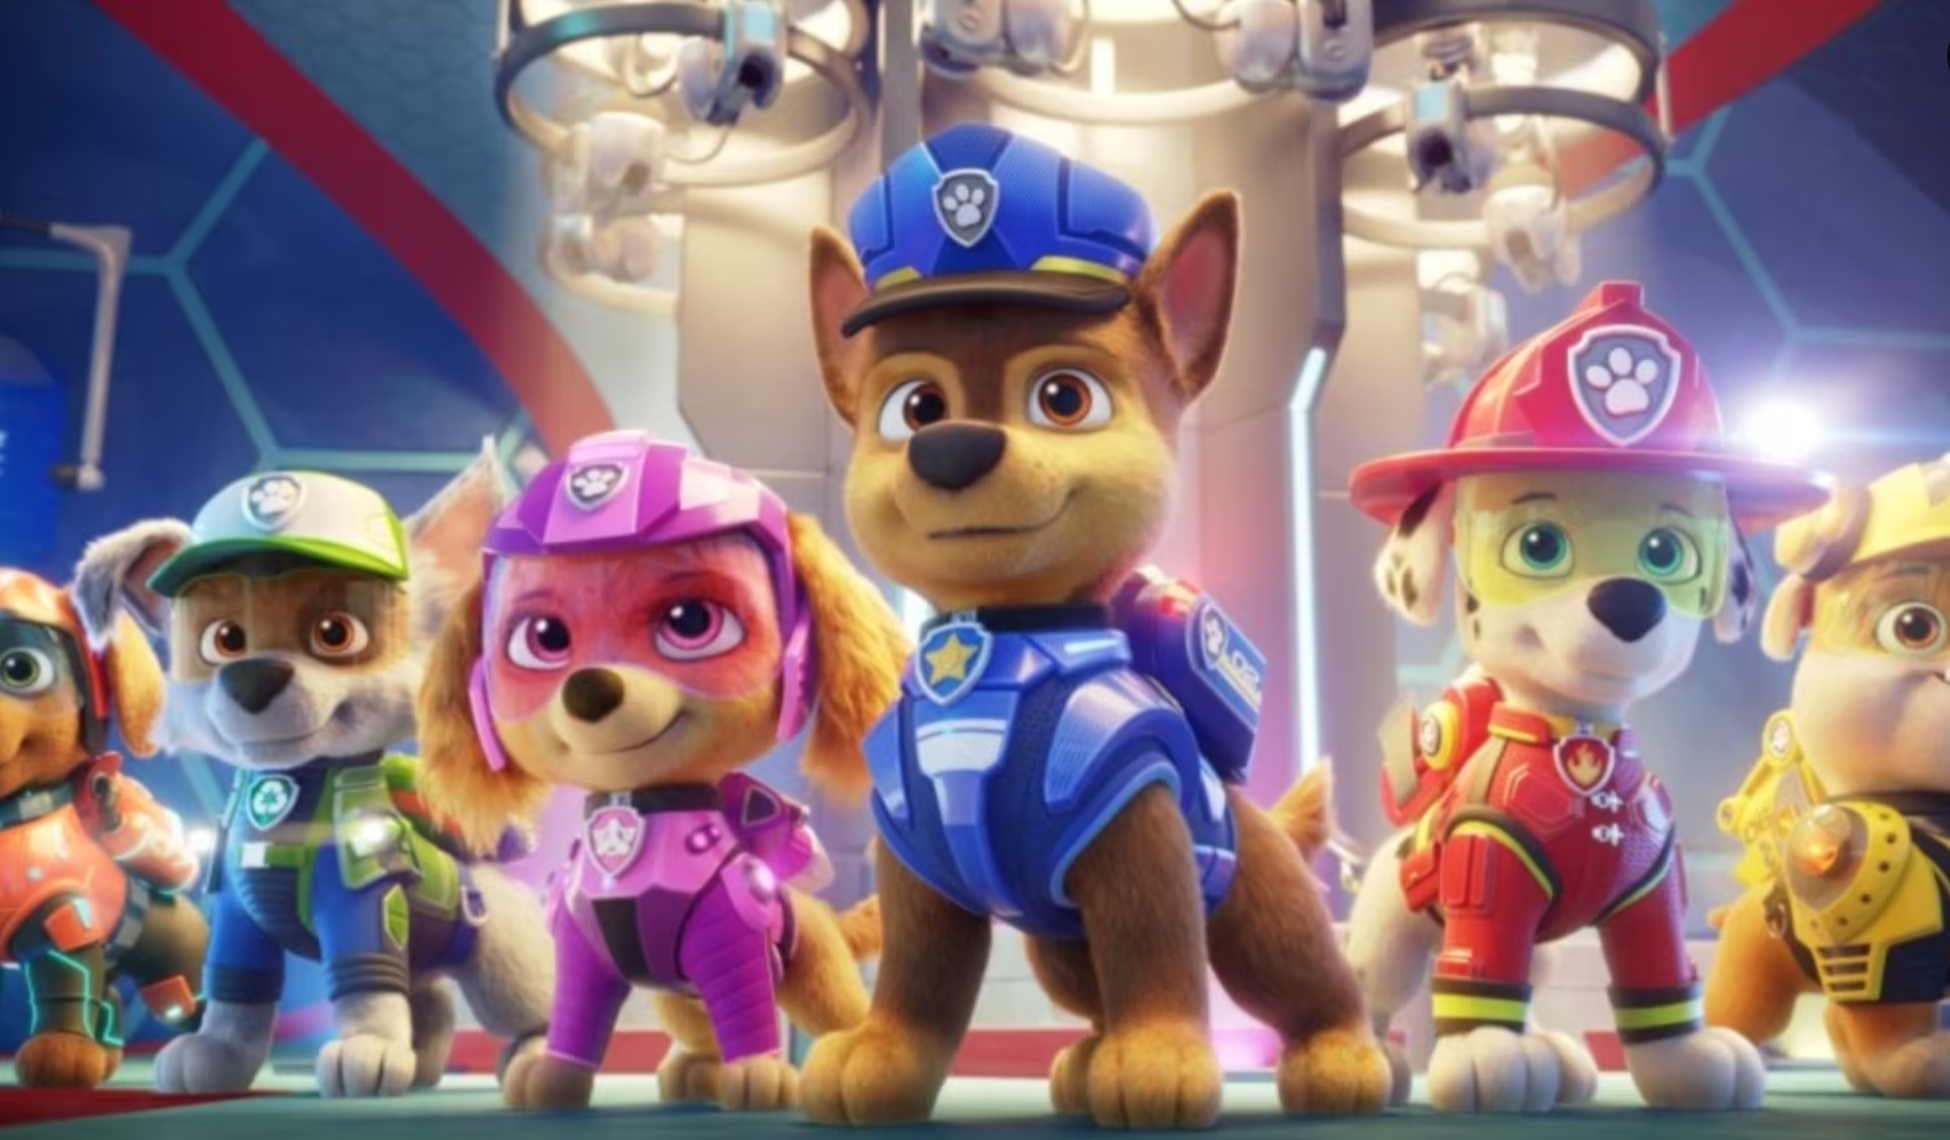 ‘PAW Patrol’ Sequel Is Top Dog at Box Office